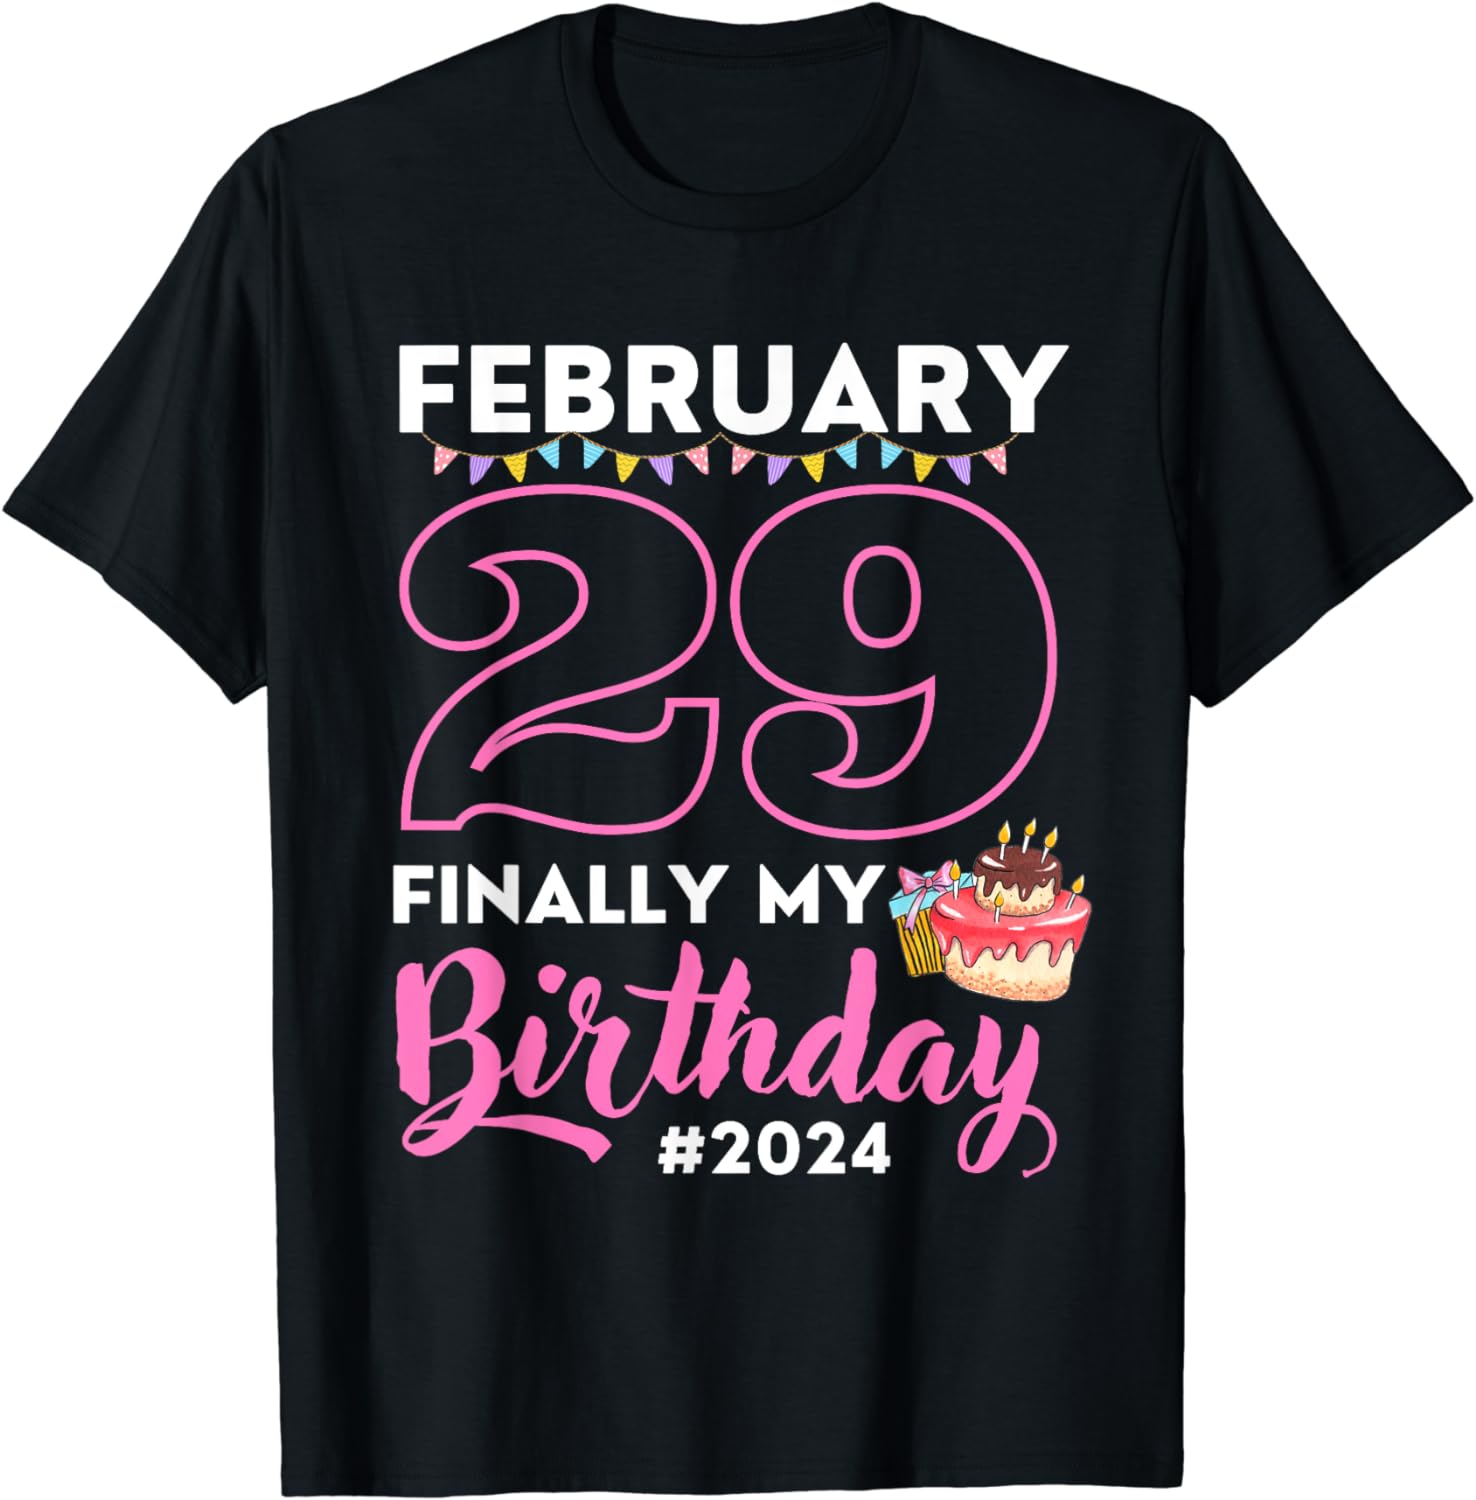 Finally My Birthday Leap Day Laughter for Leap Year 2024 TShirt Buy